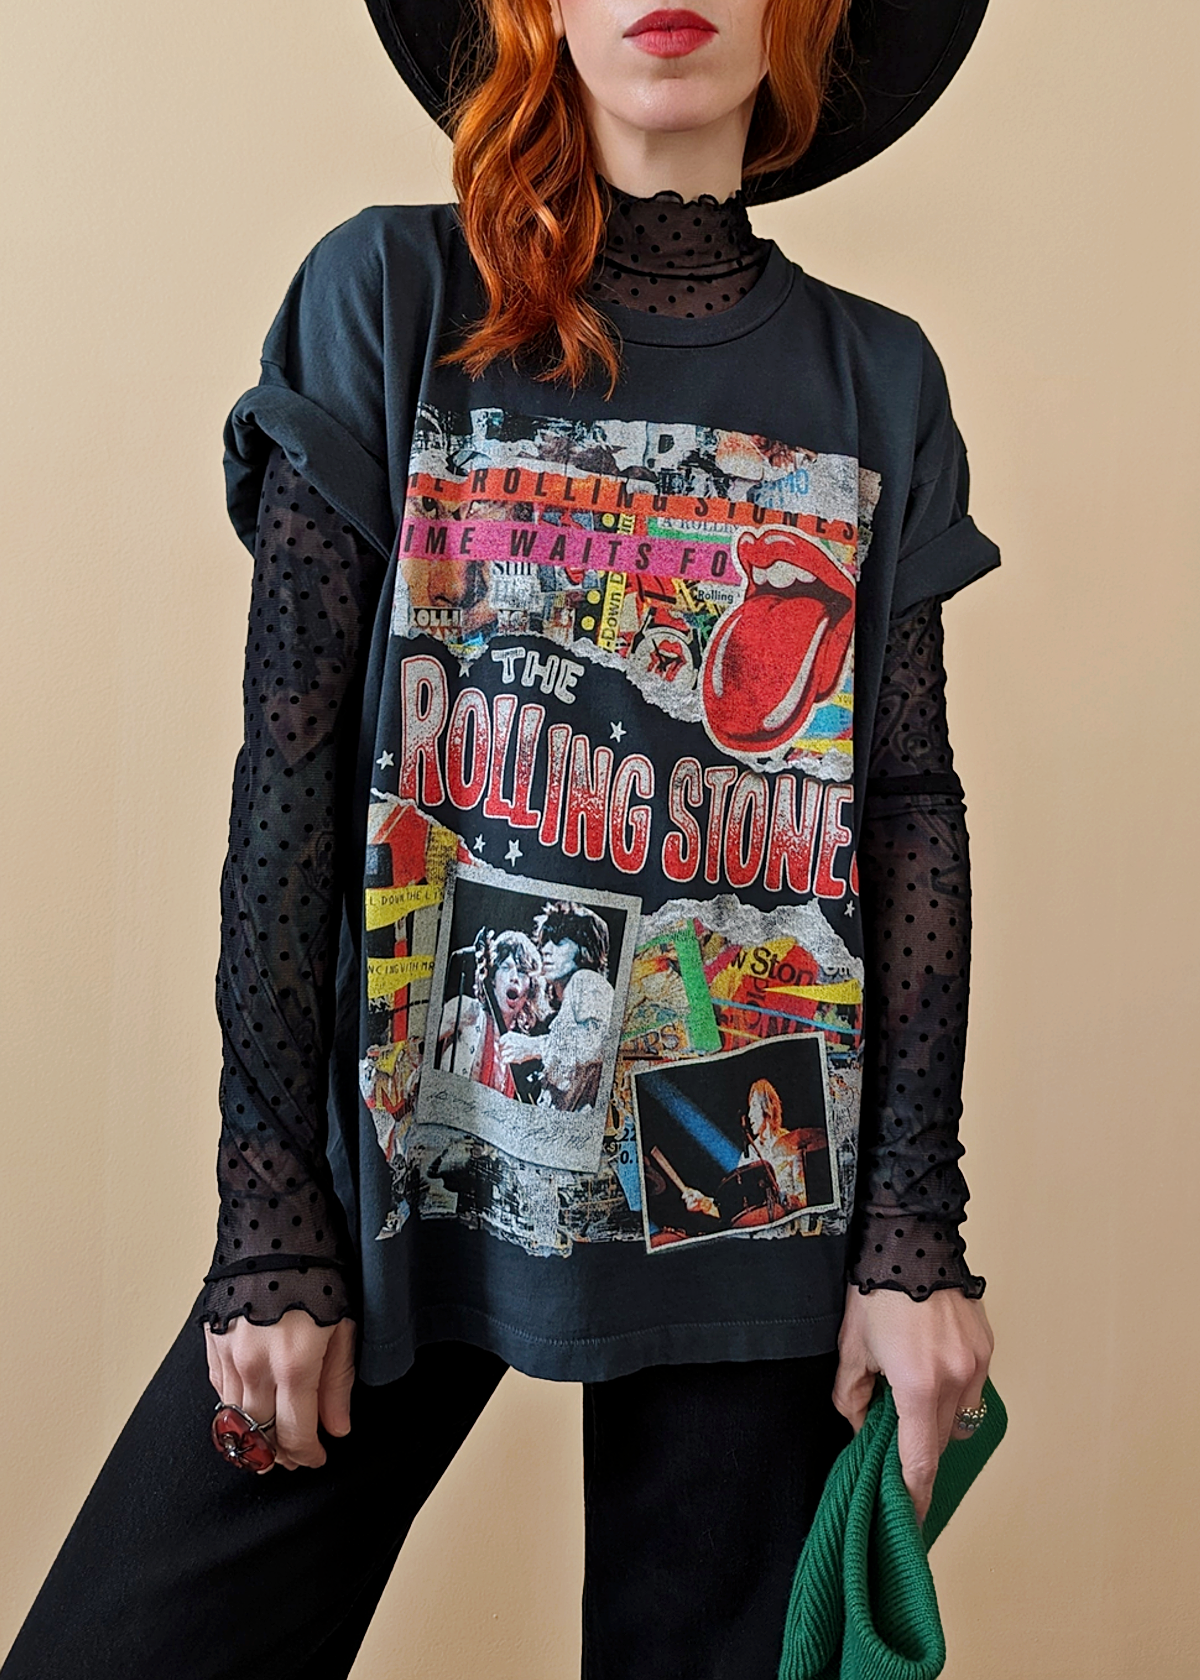 Daydreamer LA Rolling Stones Time Waits for No One Tongue Tickets Photograph Oversized Tee. Officially Licensed and made in California